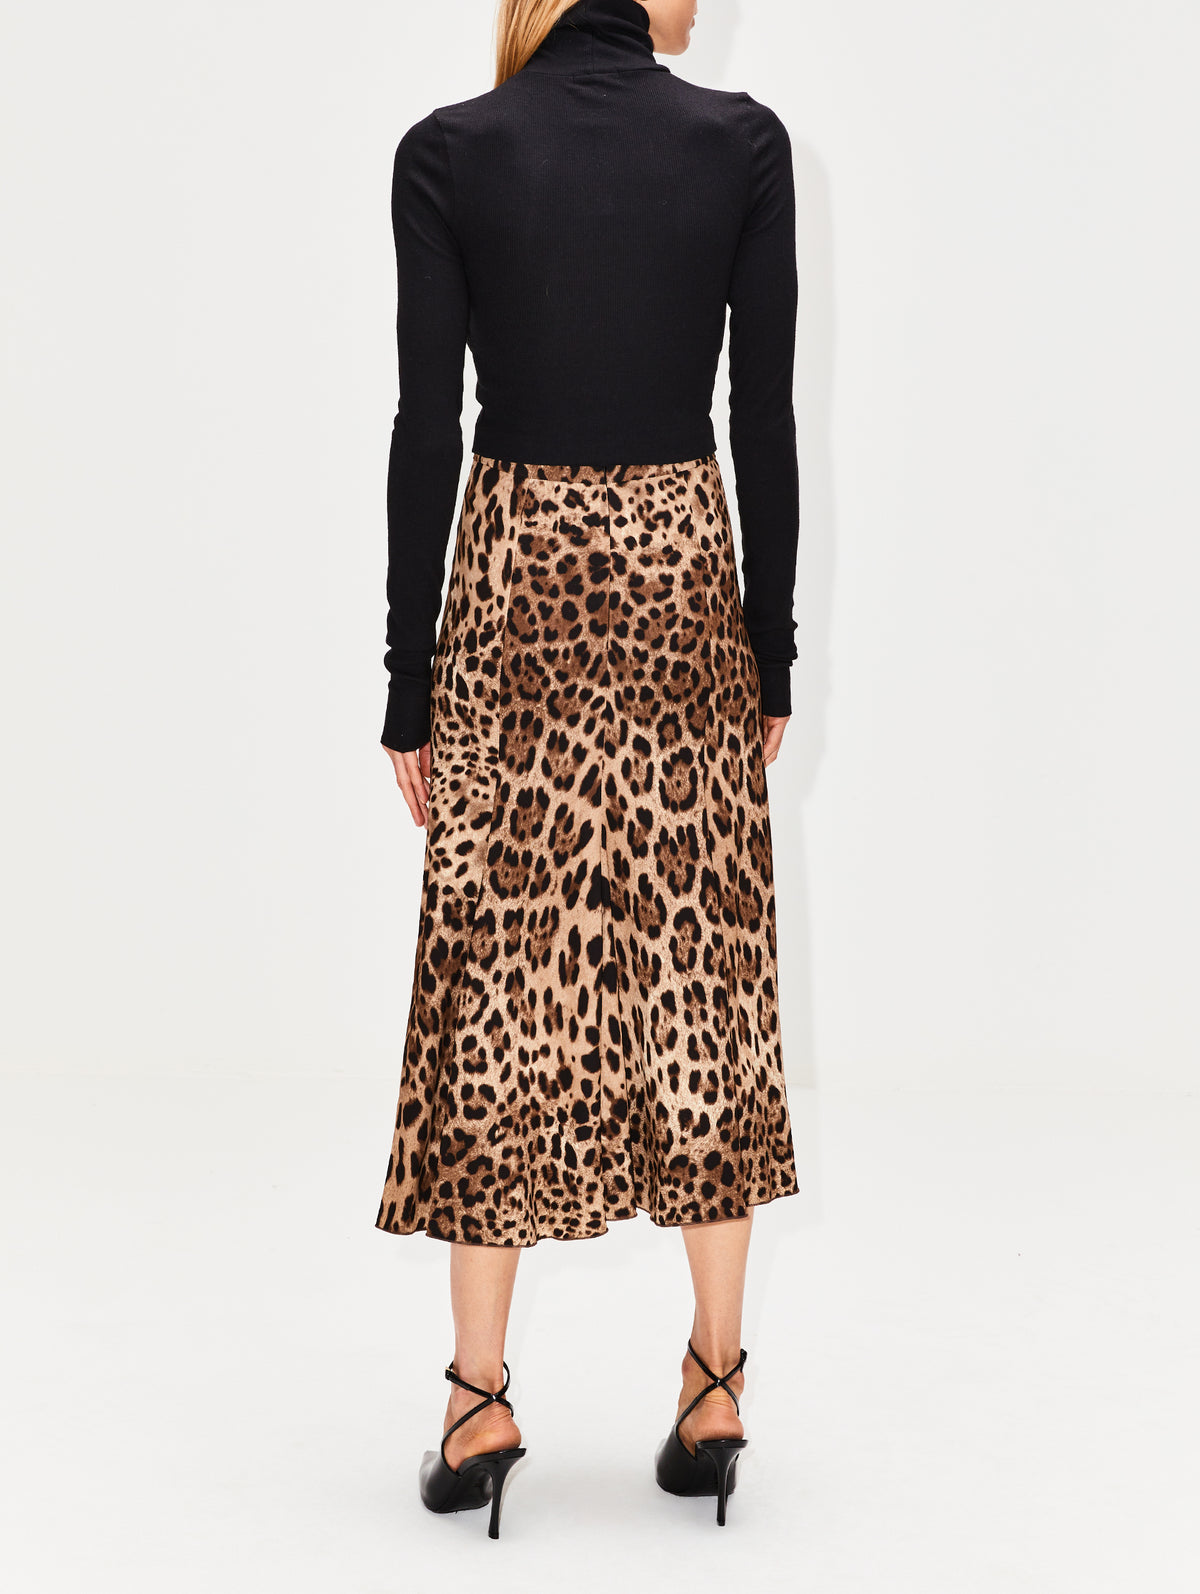 view 4 - Leopard Printed Skirt